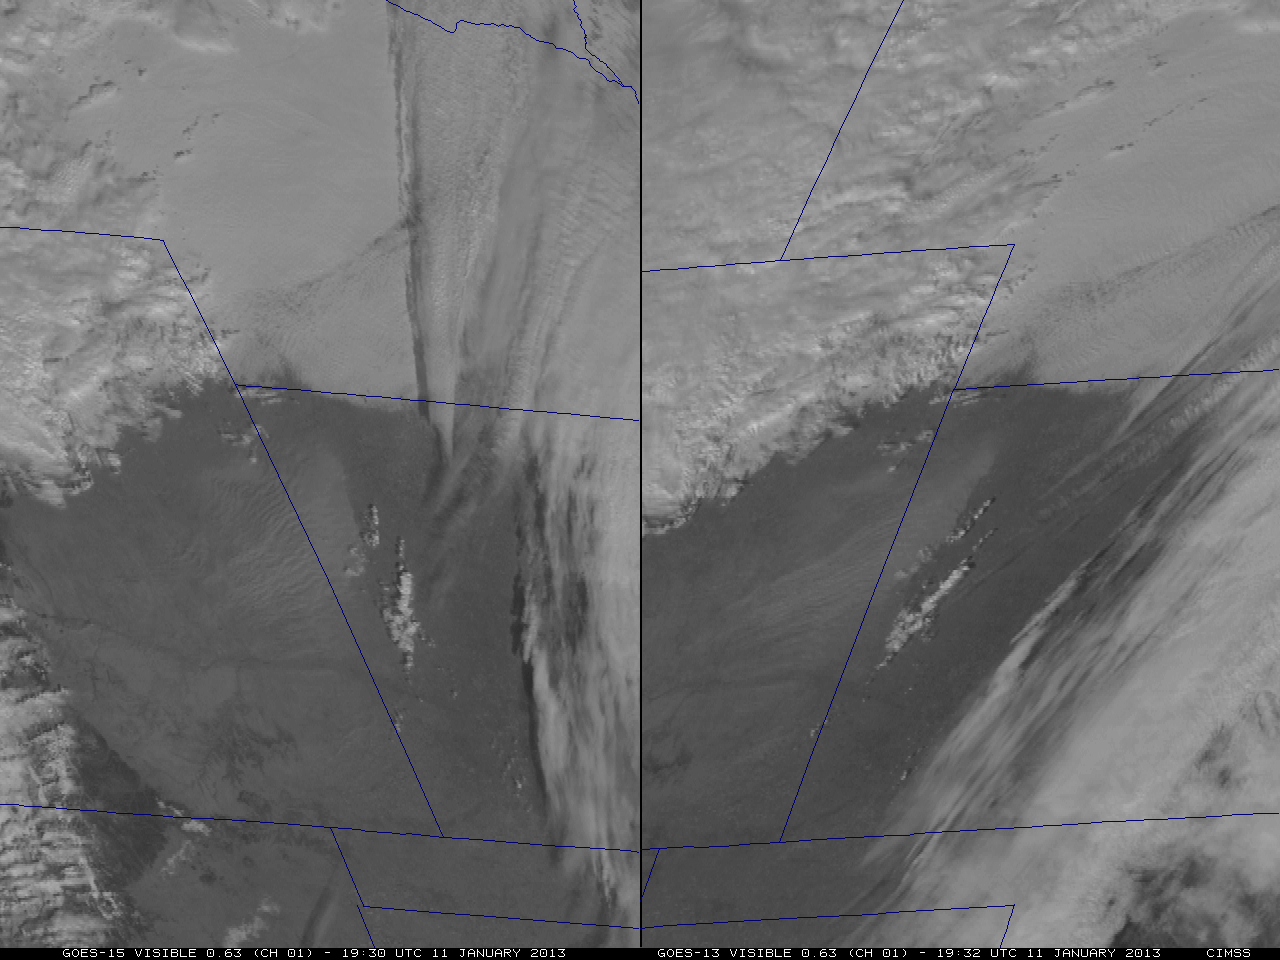 GOES-15 (left) and GOES-13 (right) 0.63 Âµm visible channel images (click image to play animation)